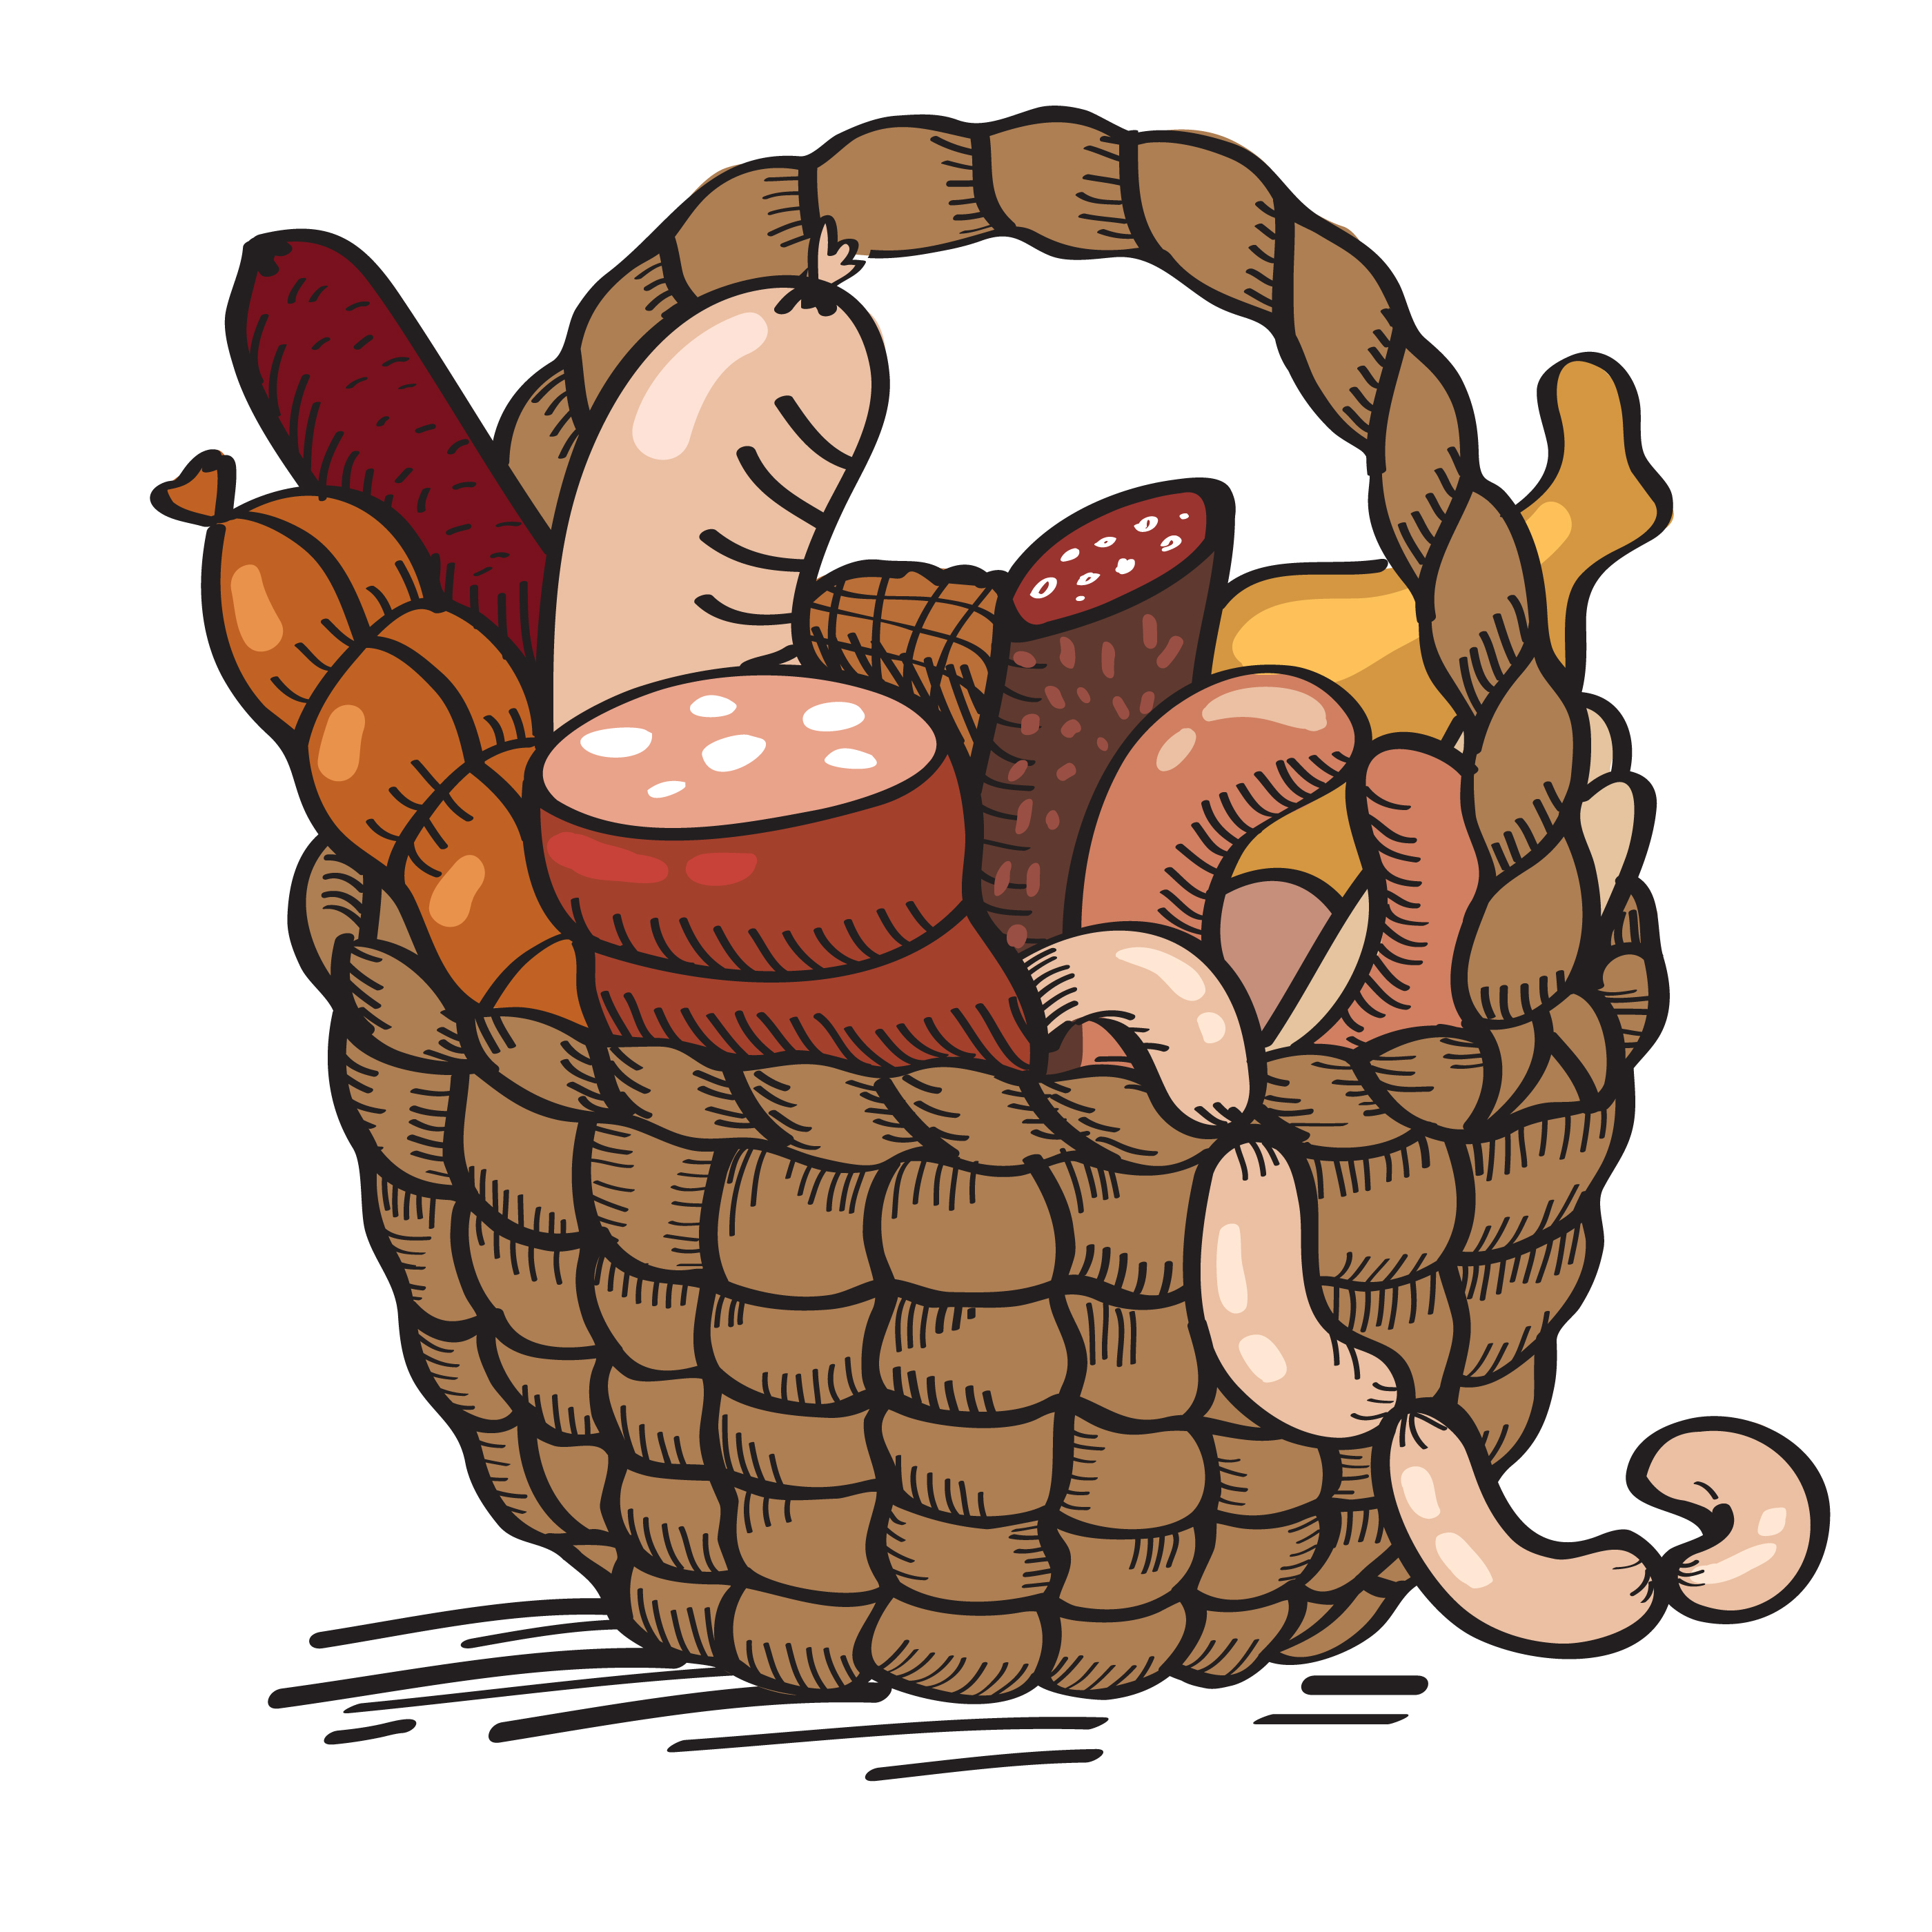 About 109 clipart for 'picnic basket clipart'. 